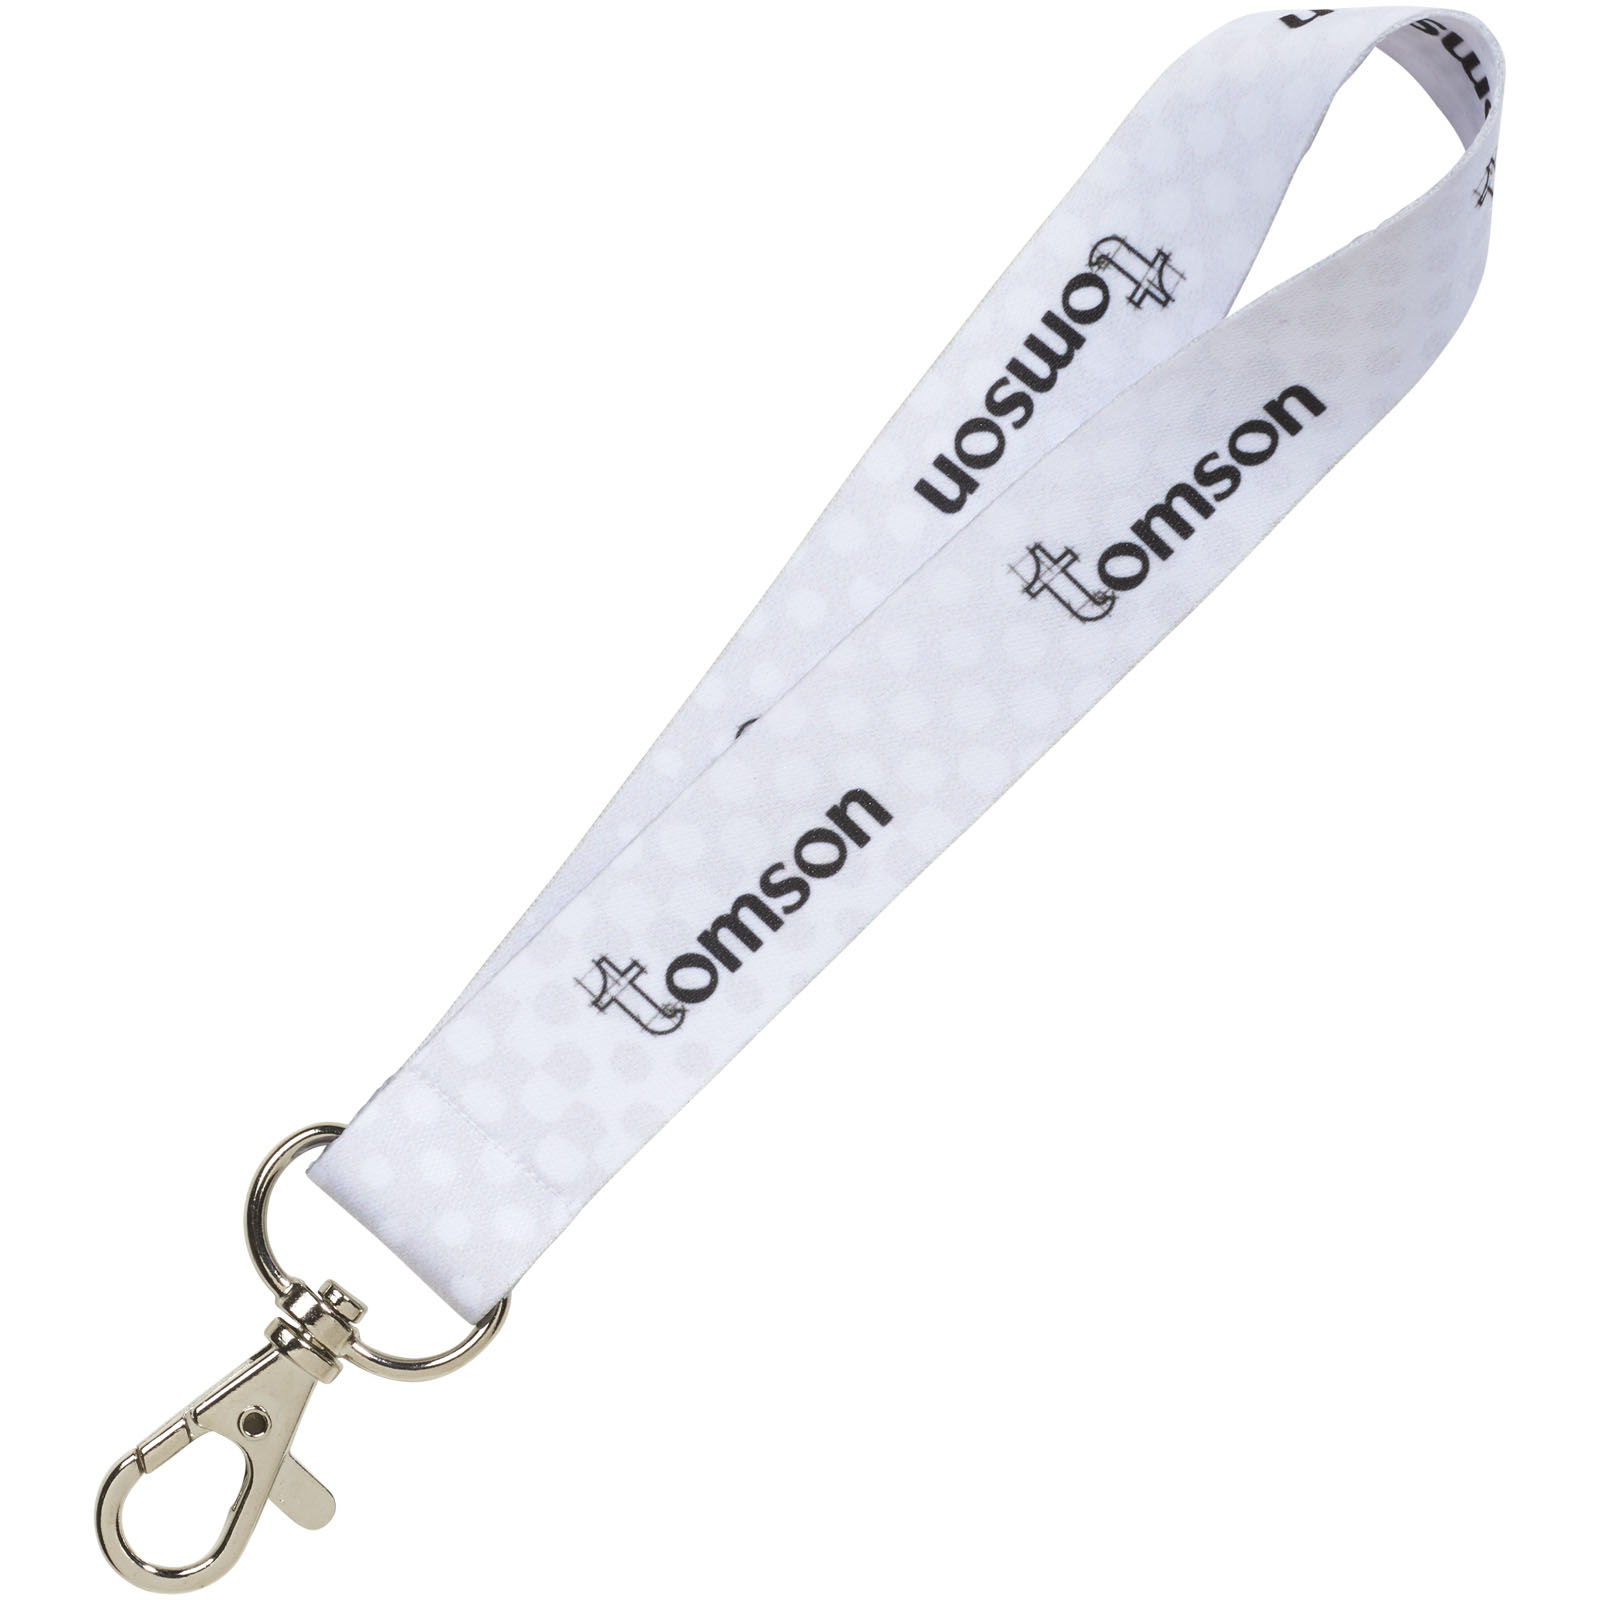 A mini lanyard in full color, with a metal hook, that has been printed using a heat transfer method known as sublimation. - Rowley Regis